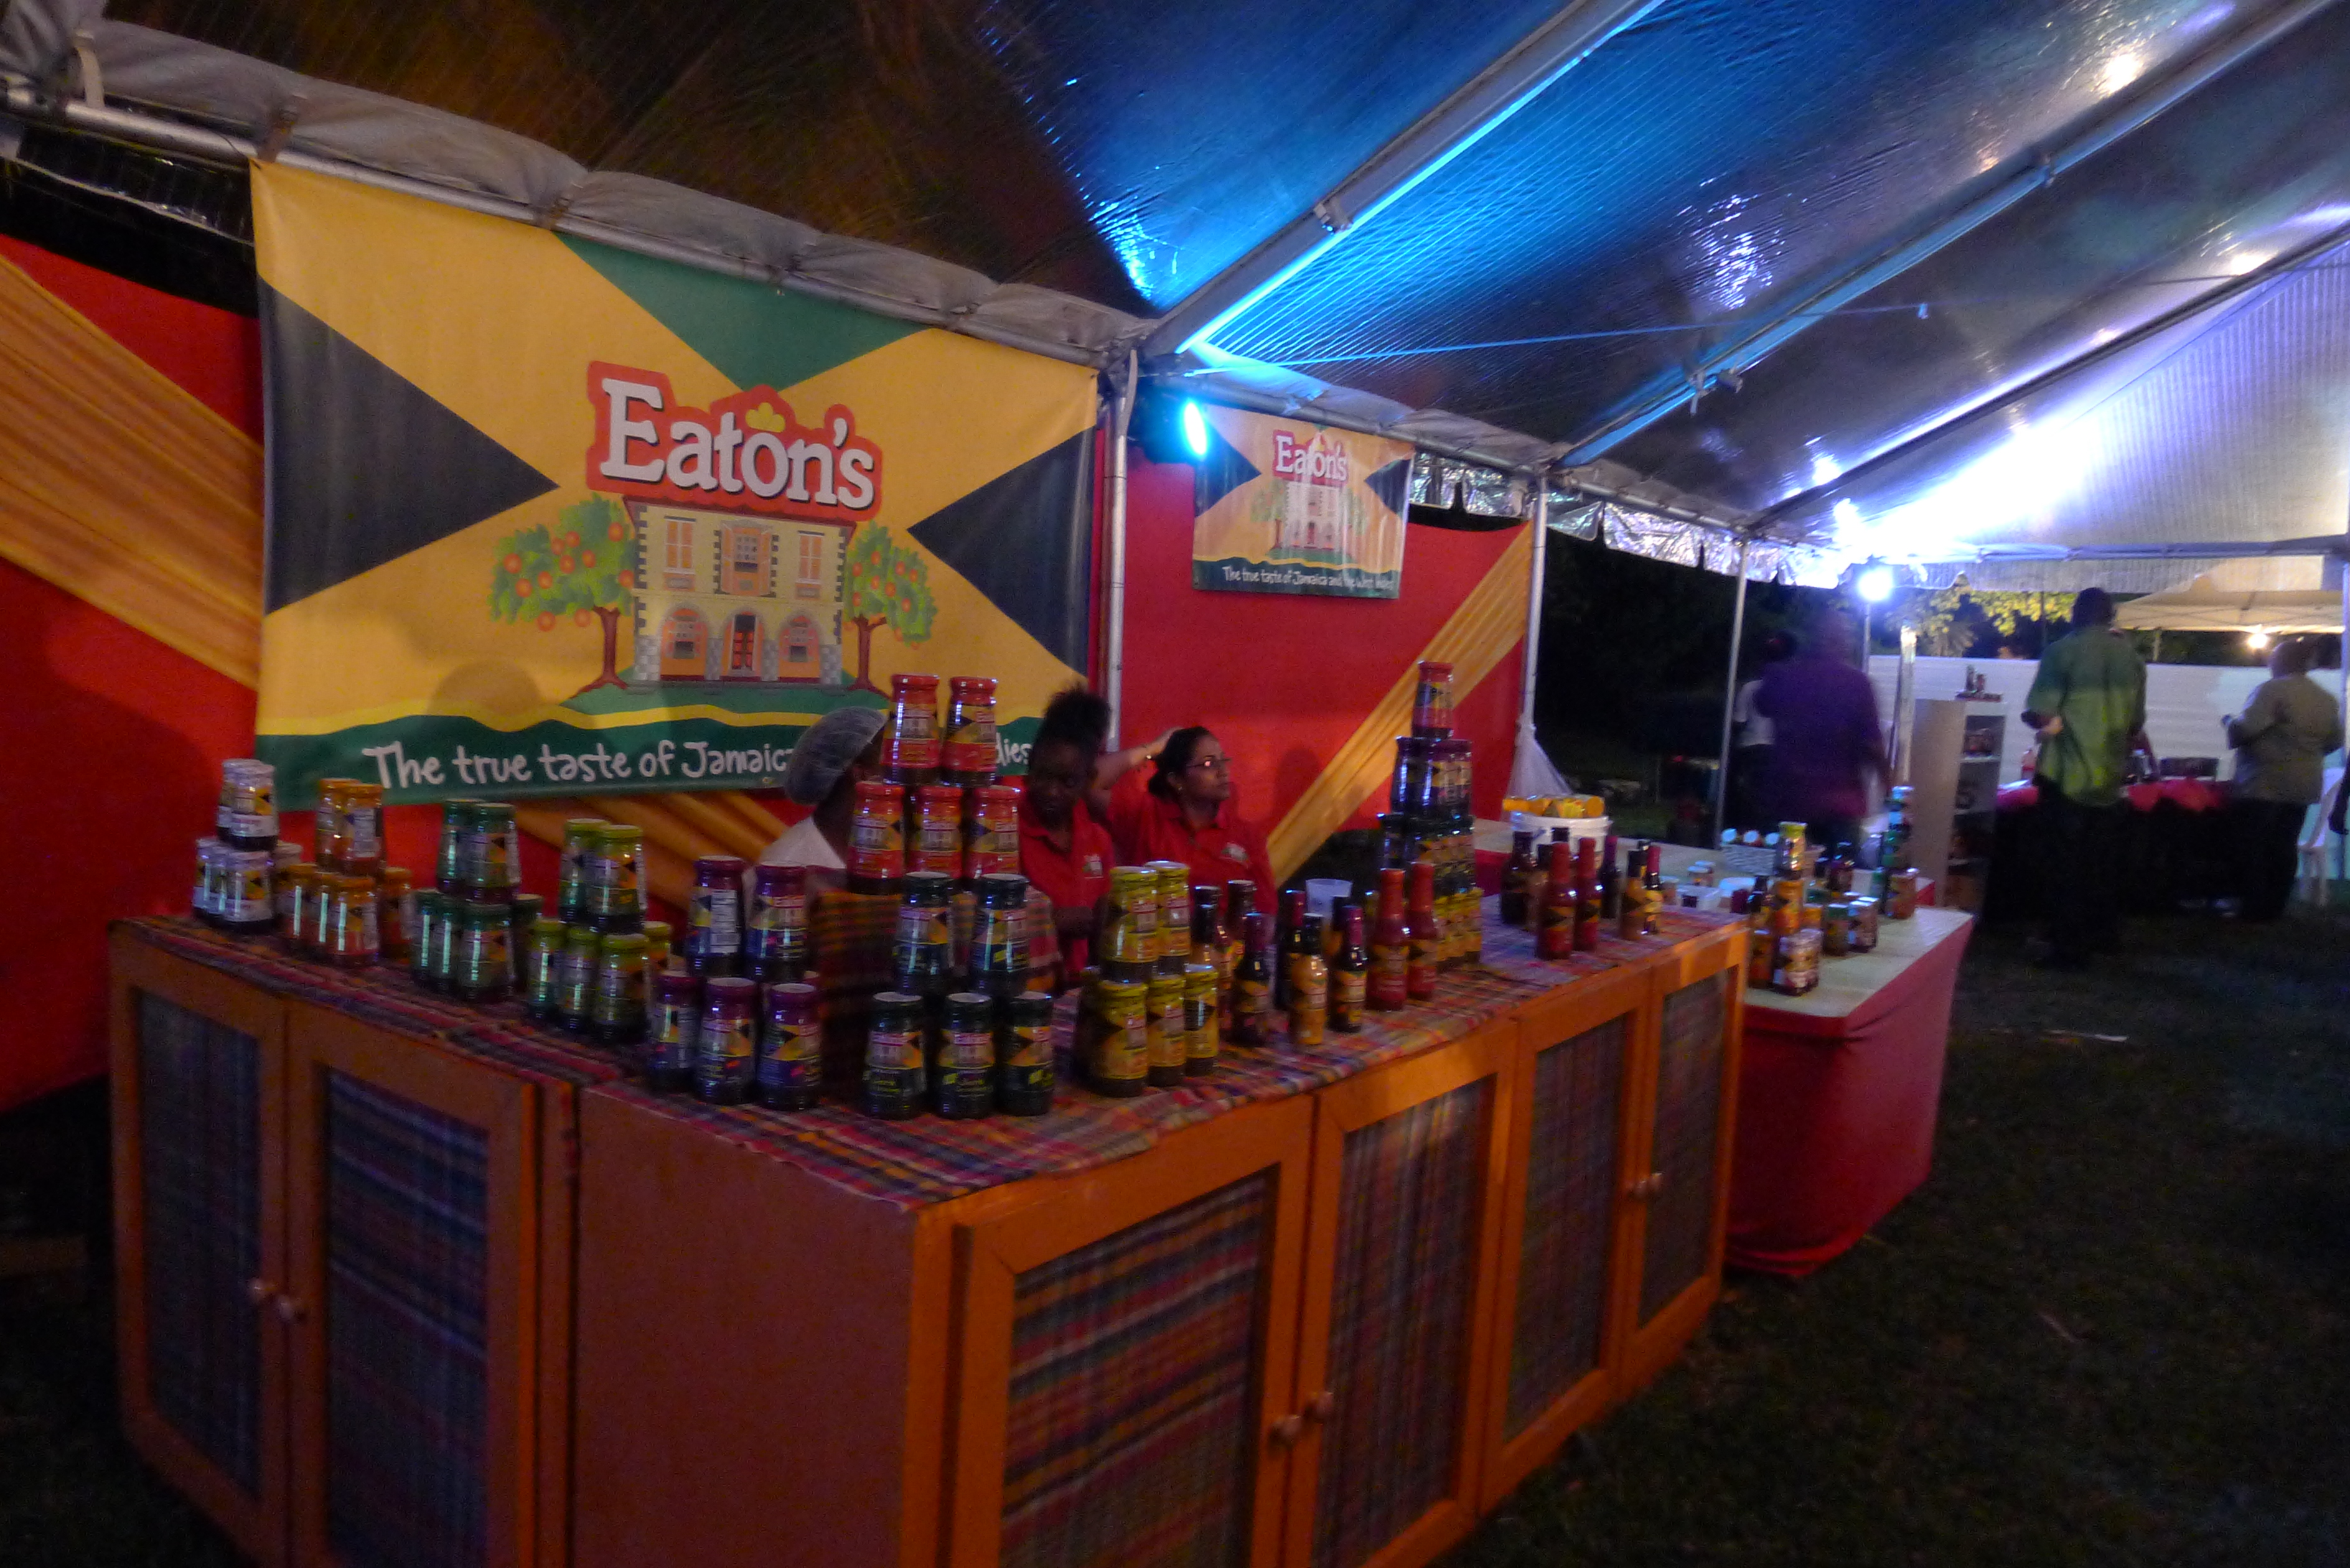 A great event for Jamaican food brands to promote themselves.